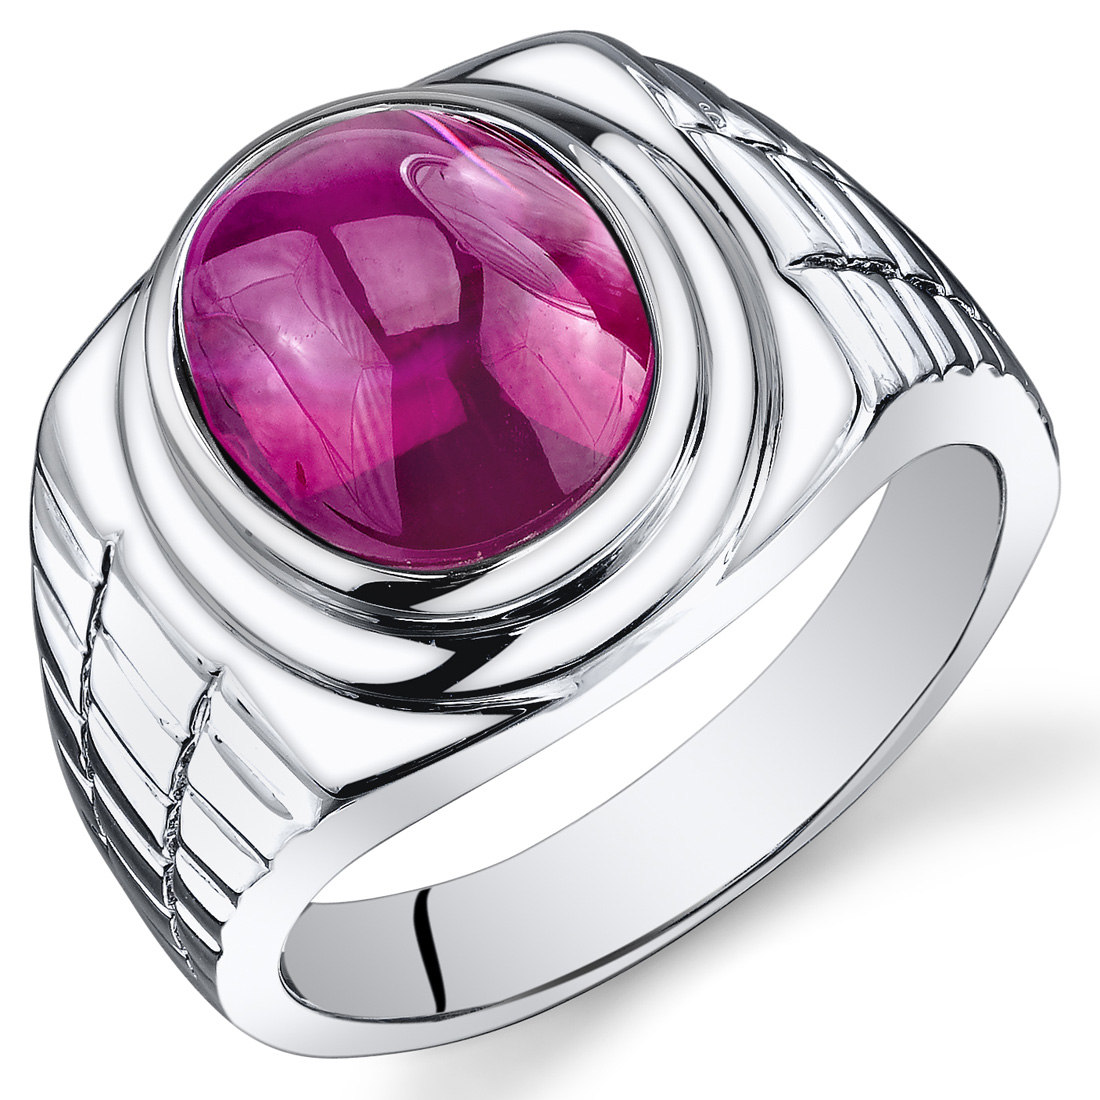 Mens 8 cts Oval Cabochon Ruby Sterling Silver Ring Diamond Bar